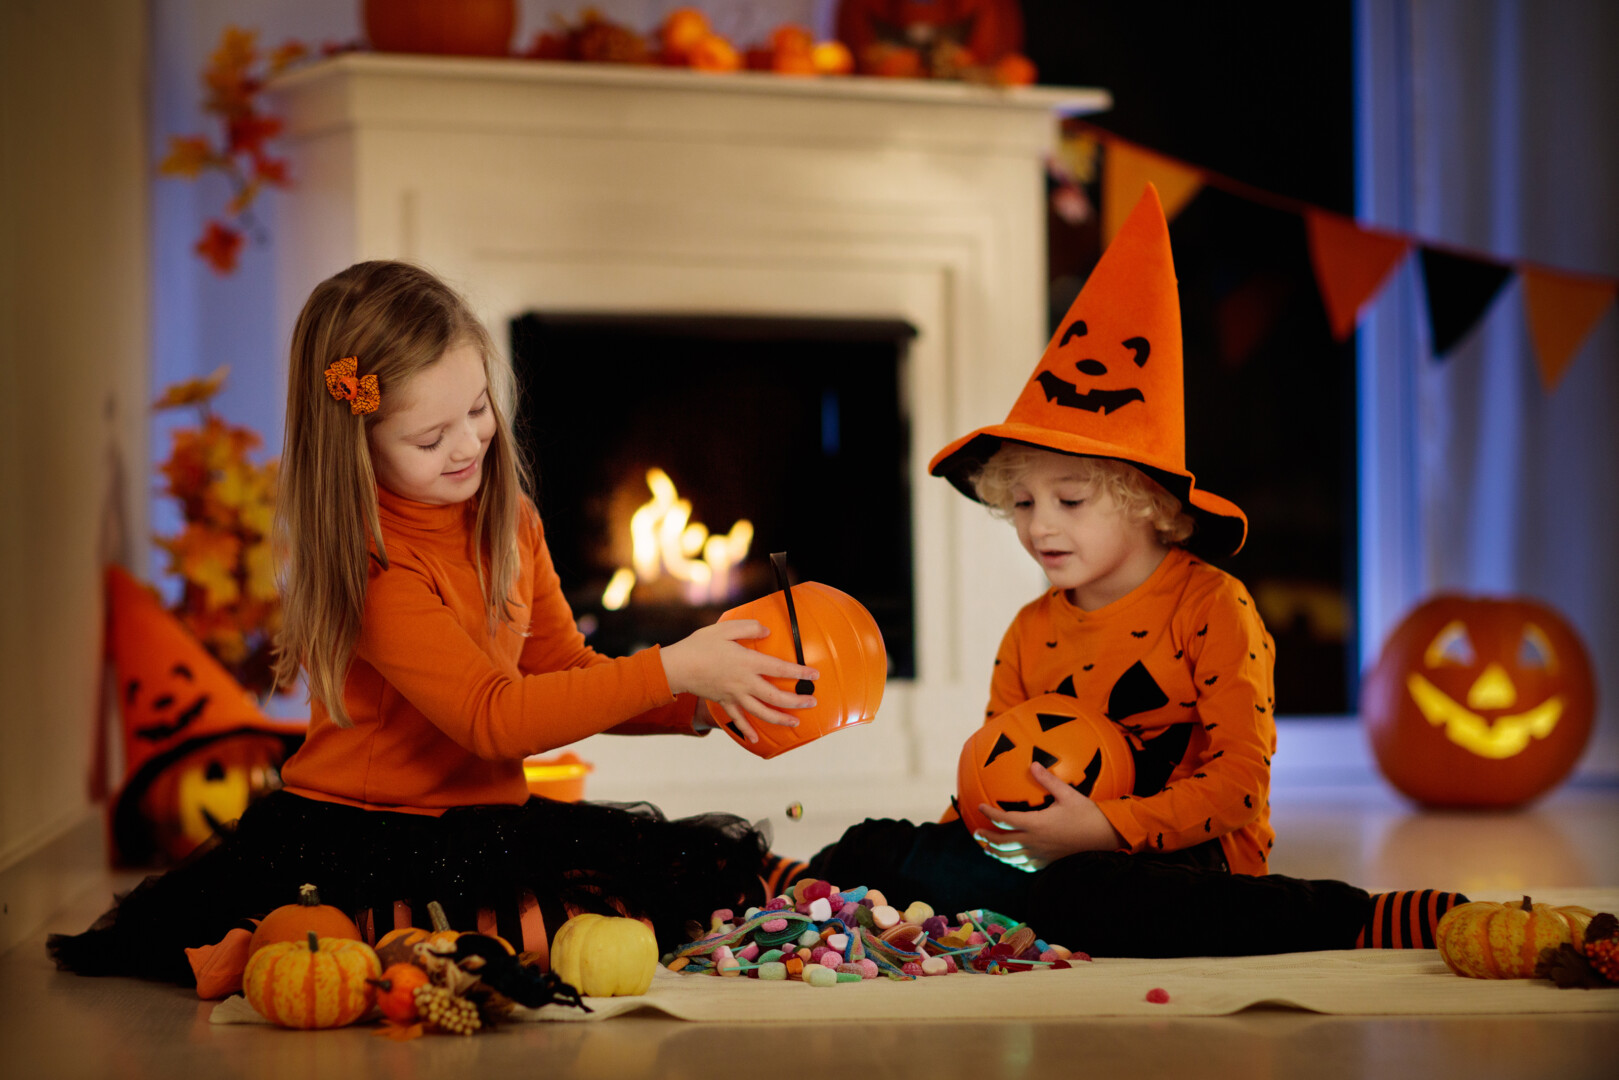 A young girl and boy dressed for Halloween dump their buckets of candy into a large pile on the floor between them.